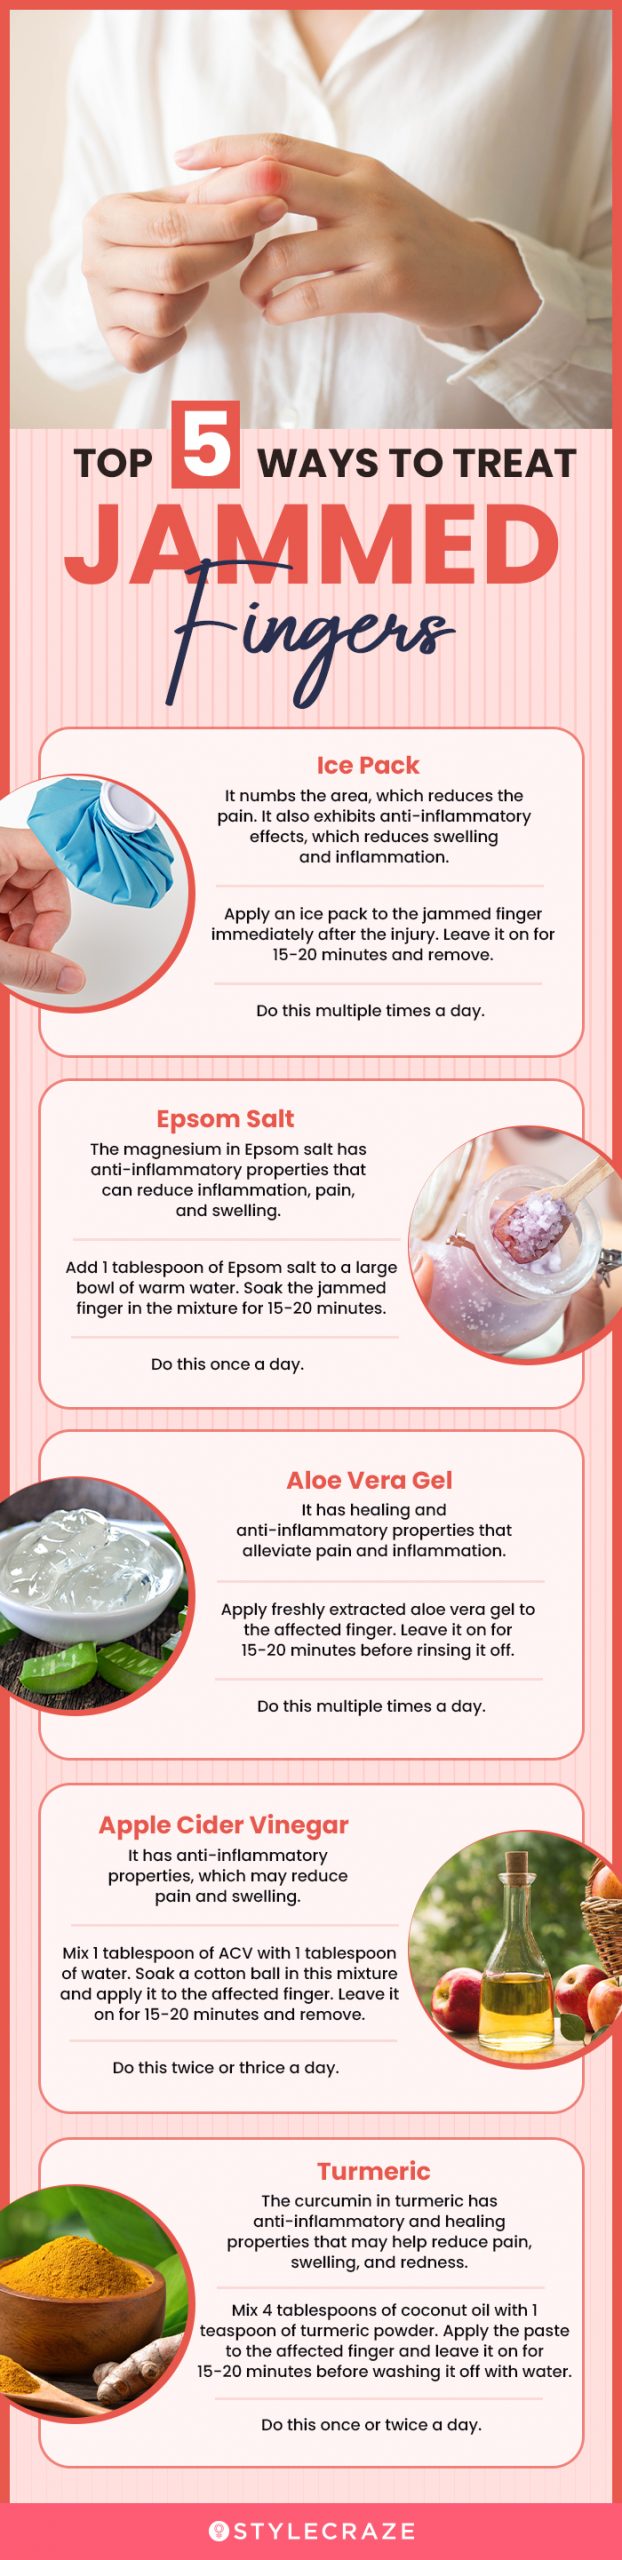 top 5 ways to treat jammed fingers (infographic)